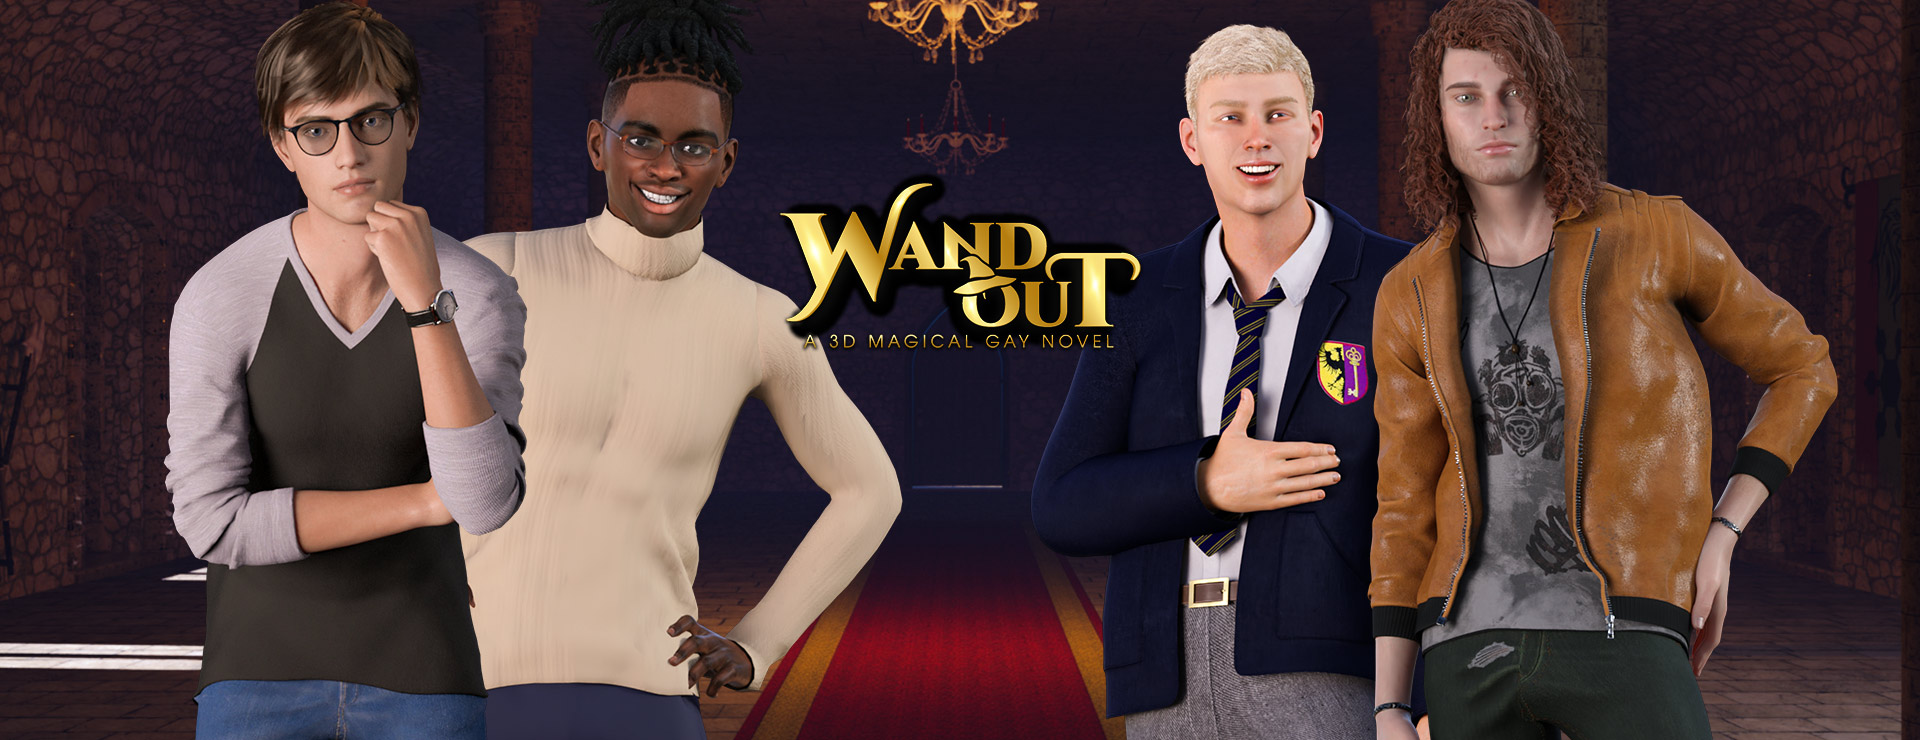 Wand Out - 虚拟小说 遊戲